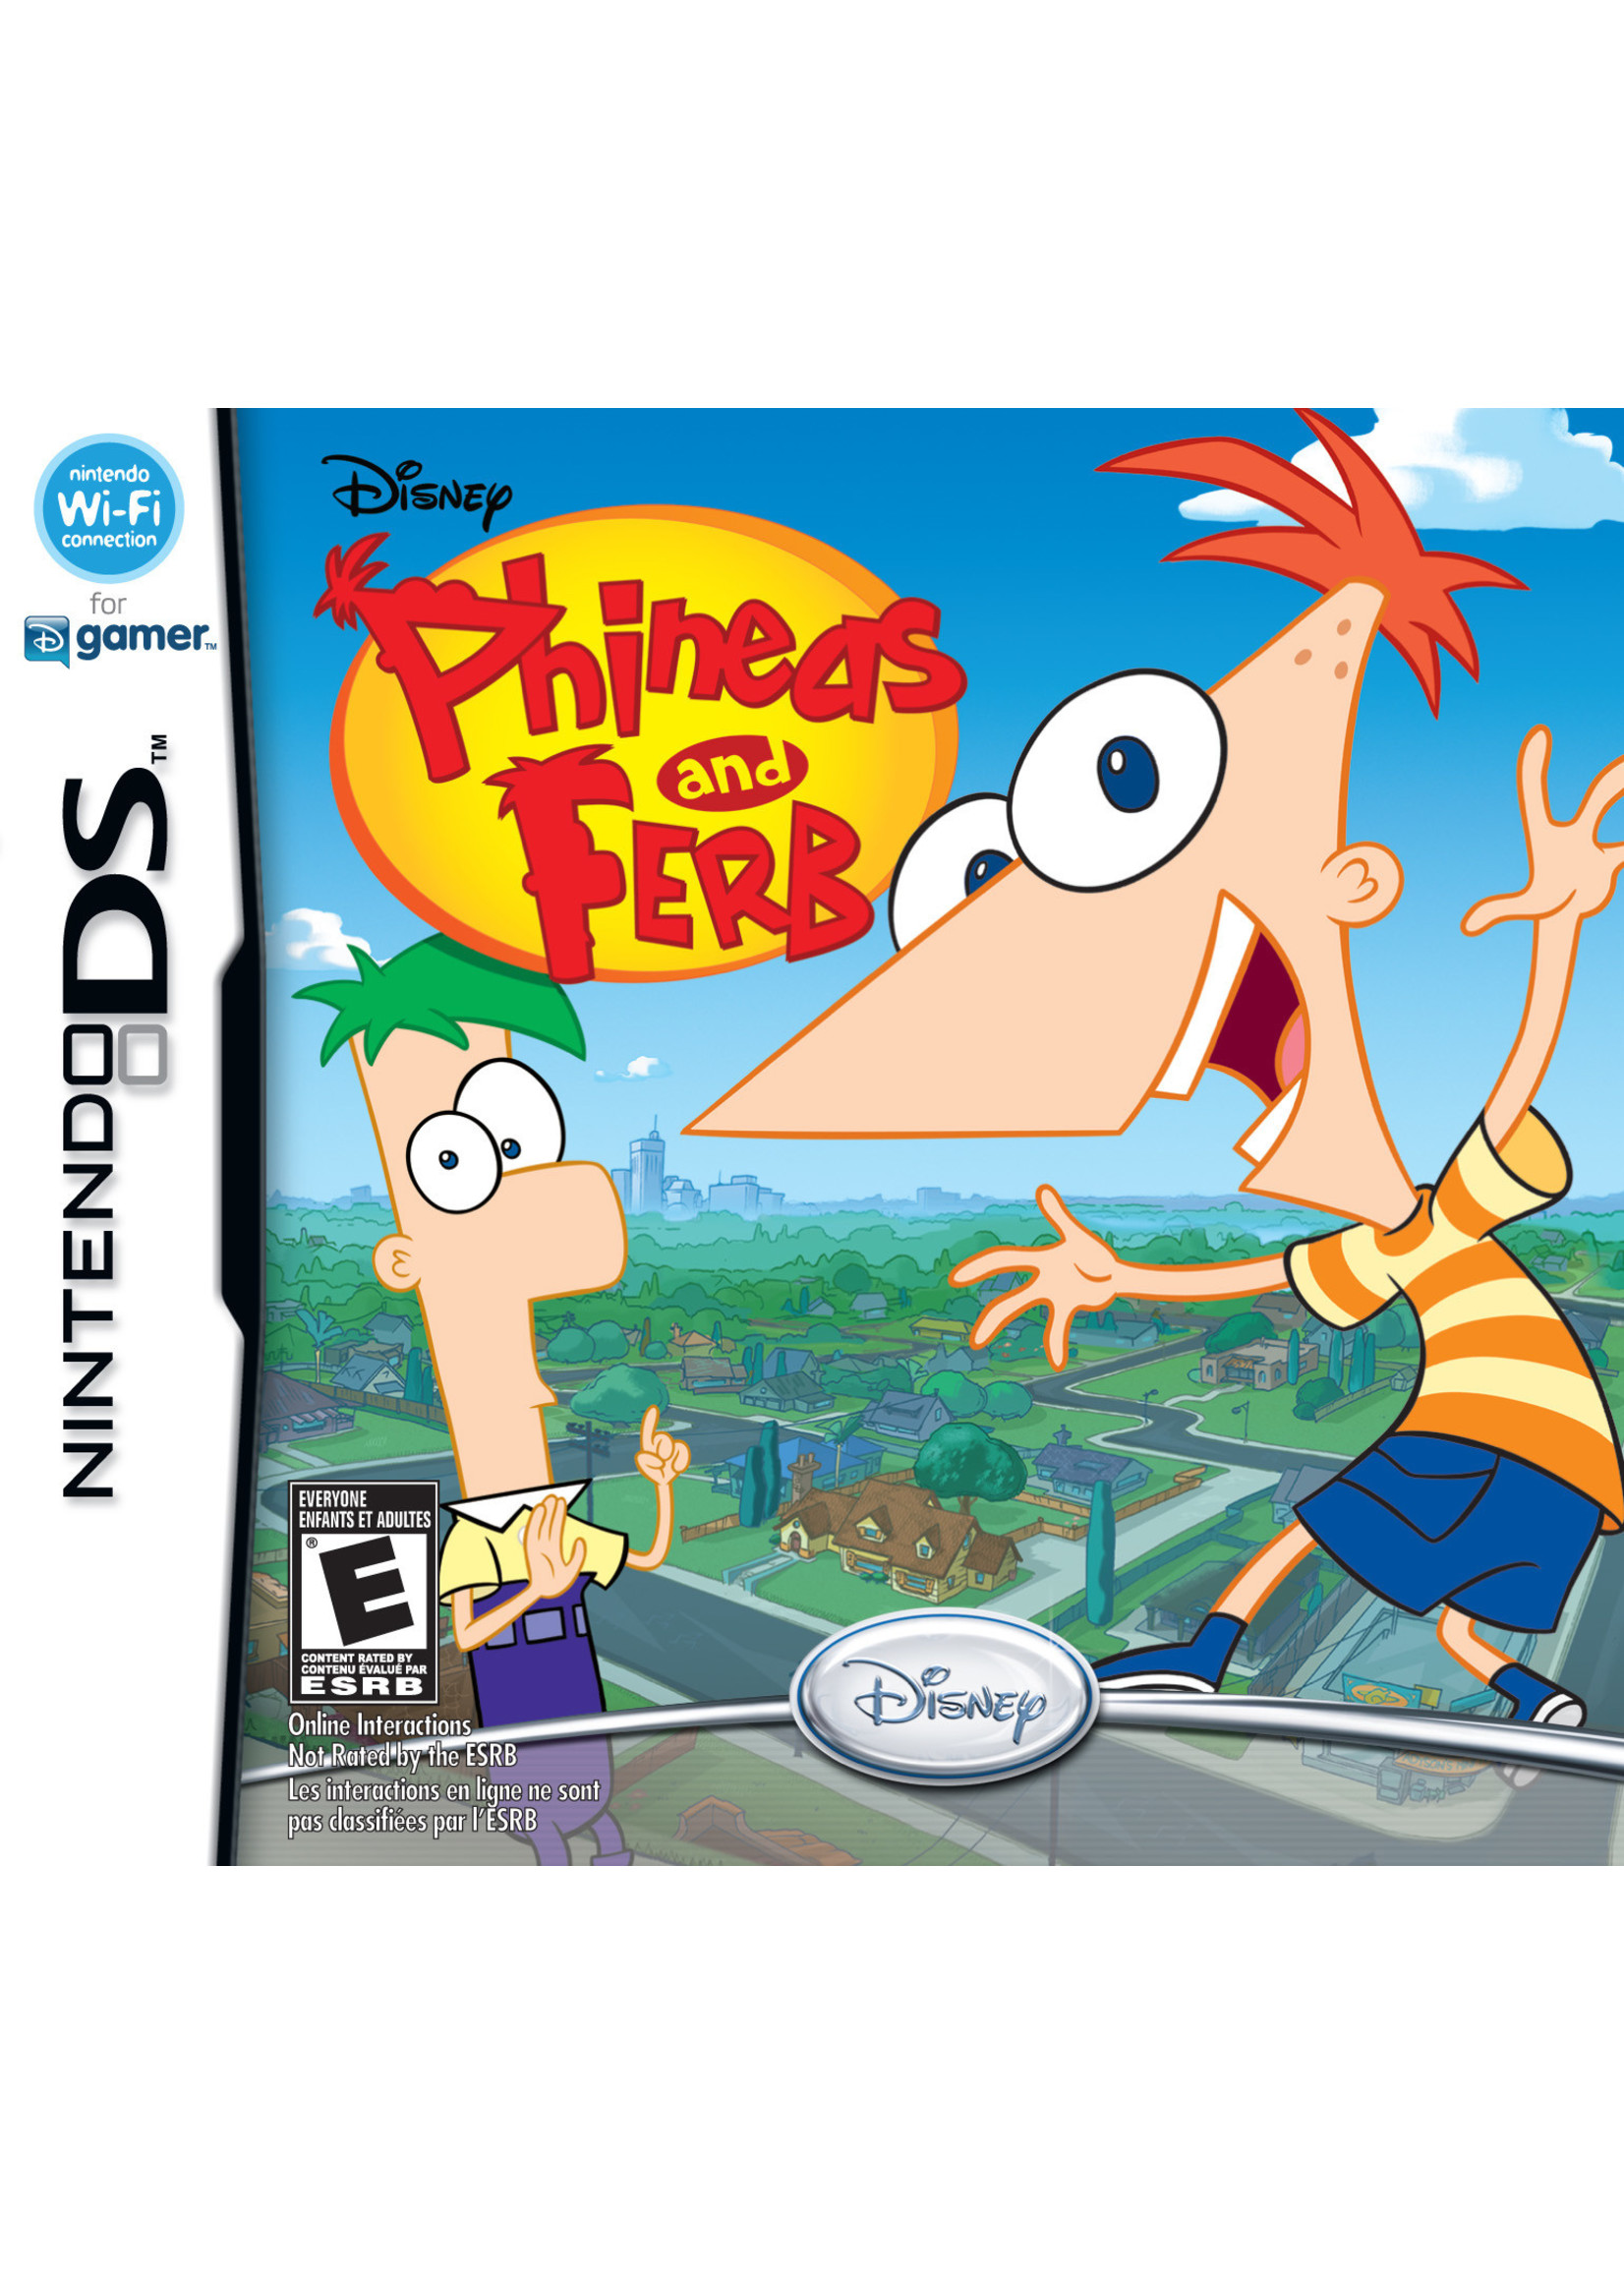 Nintendo DS Phineas and Ferb - Cart Only